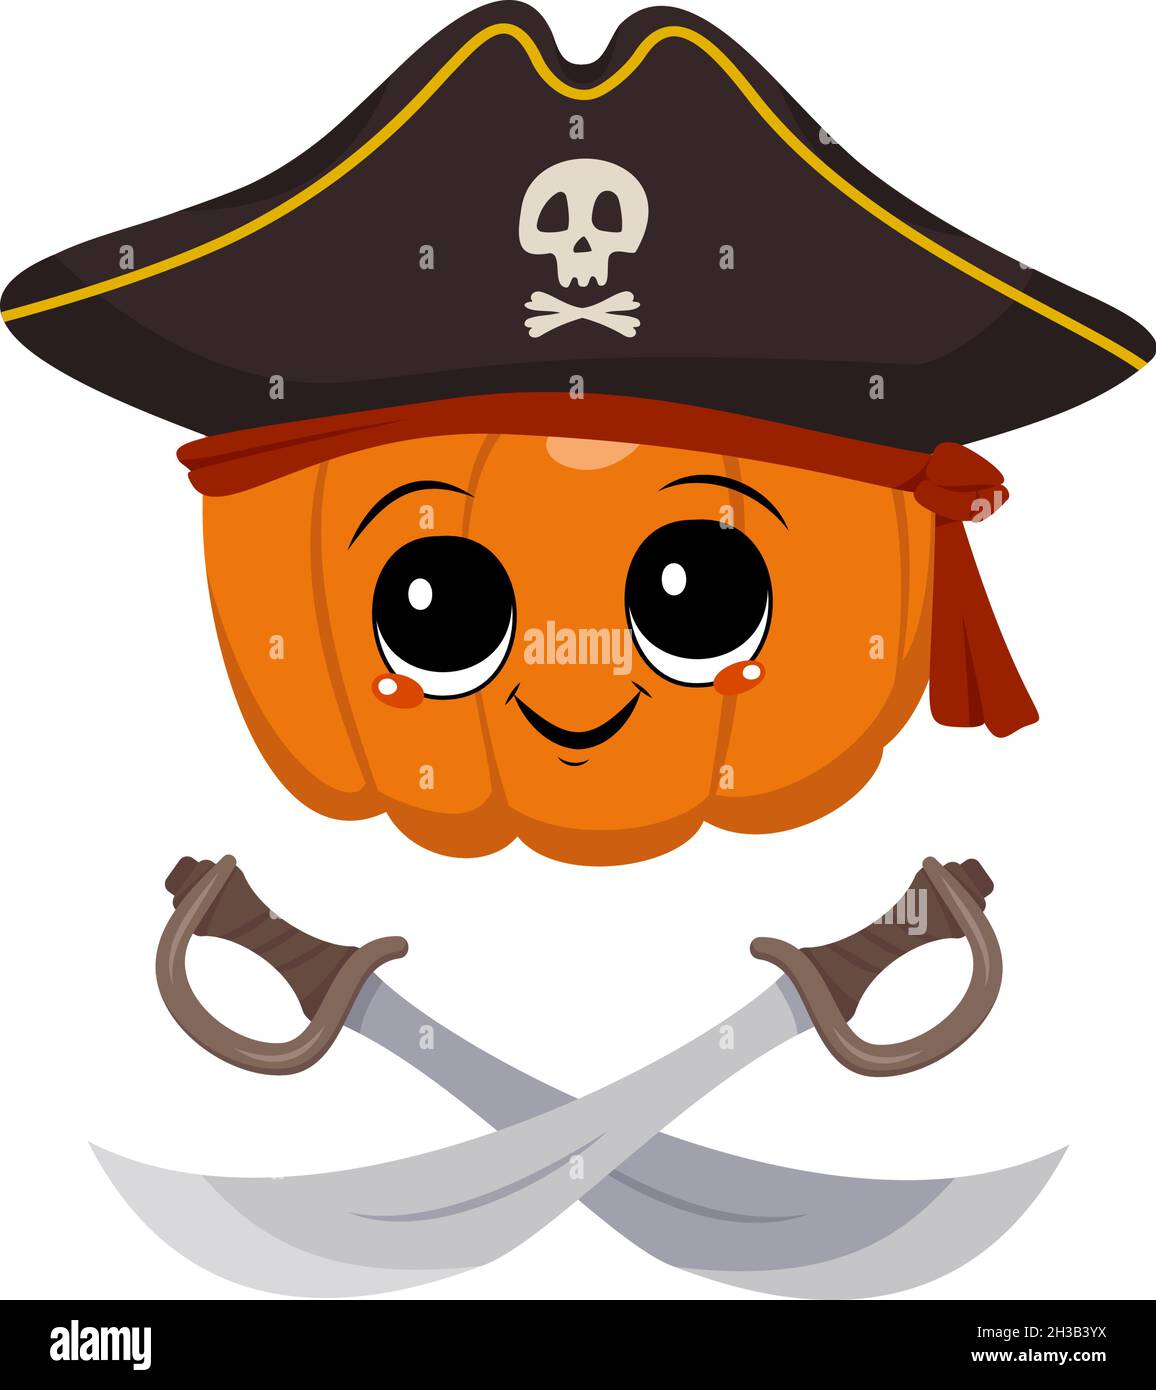 Cute pumpkin character with happy emotions, face, big eyes and wide smile in captain cocked hat and crossed sabers. Halloween party decoration. Mischievous Vegetable Hero Stock Vector